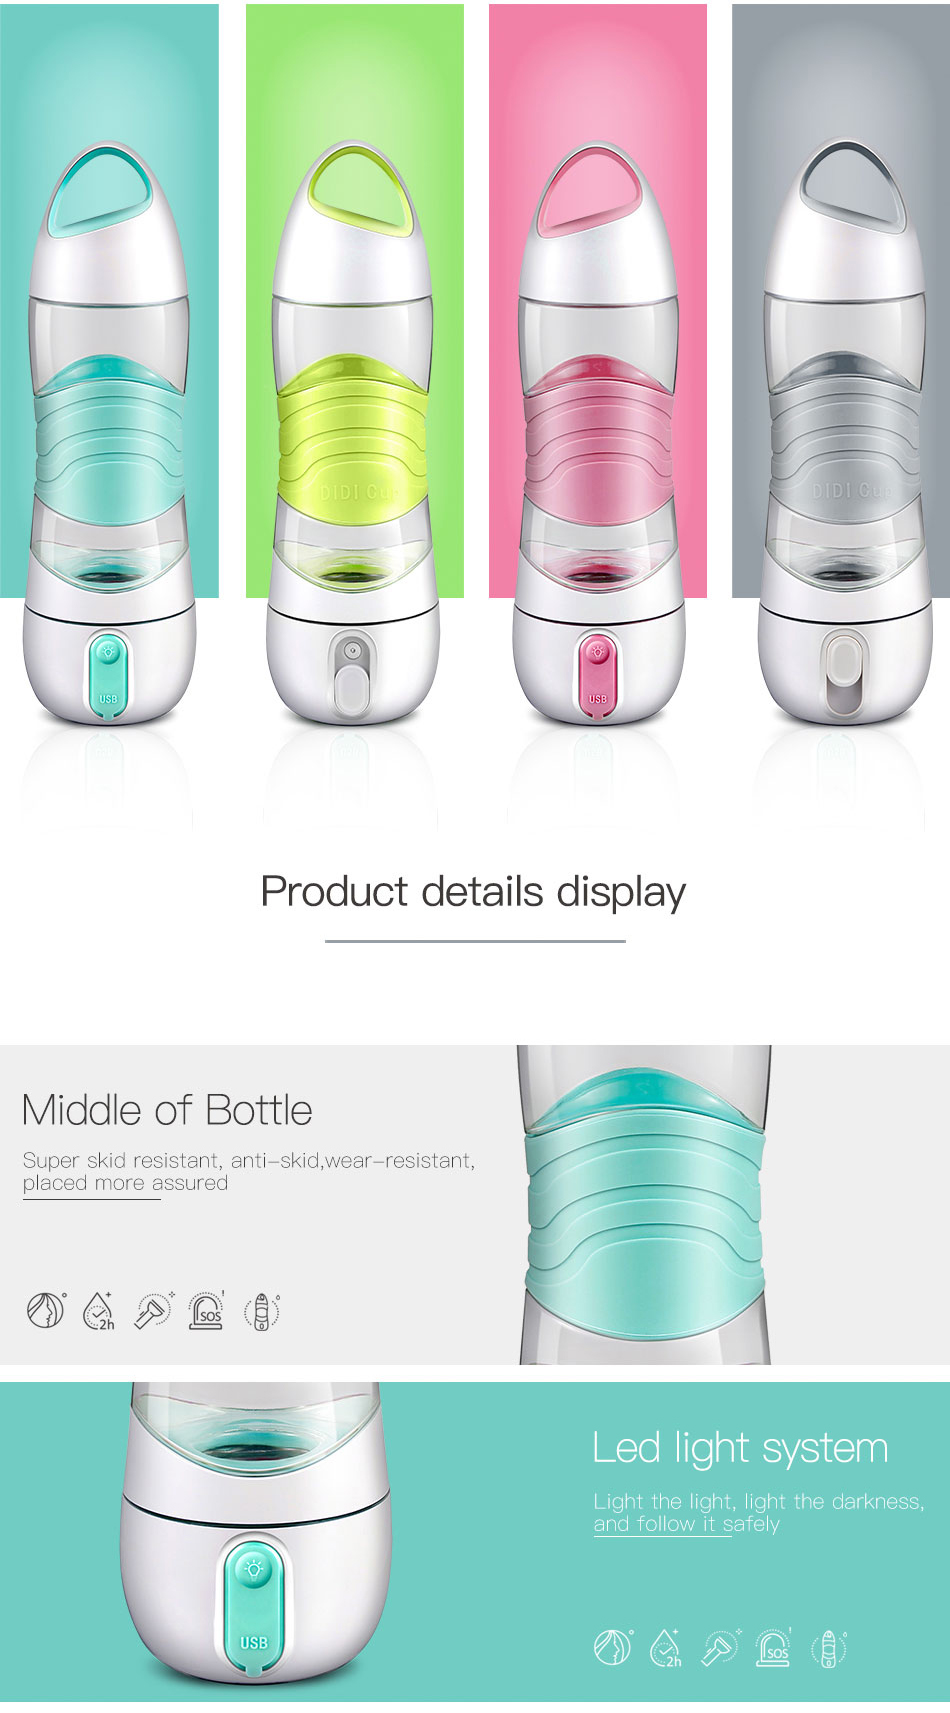 KCASA-DDH8 Portable USB Air Humidifier Spray 400ML Water Bottles Creative Outdoor Drinking Cup Sports Spray Bottle with Light 67